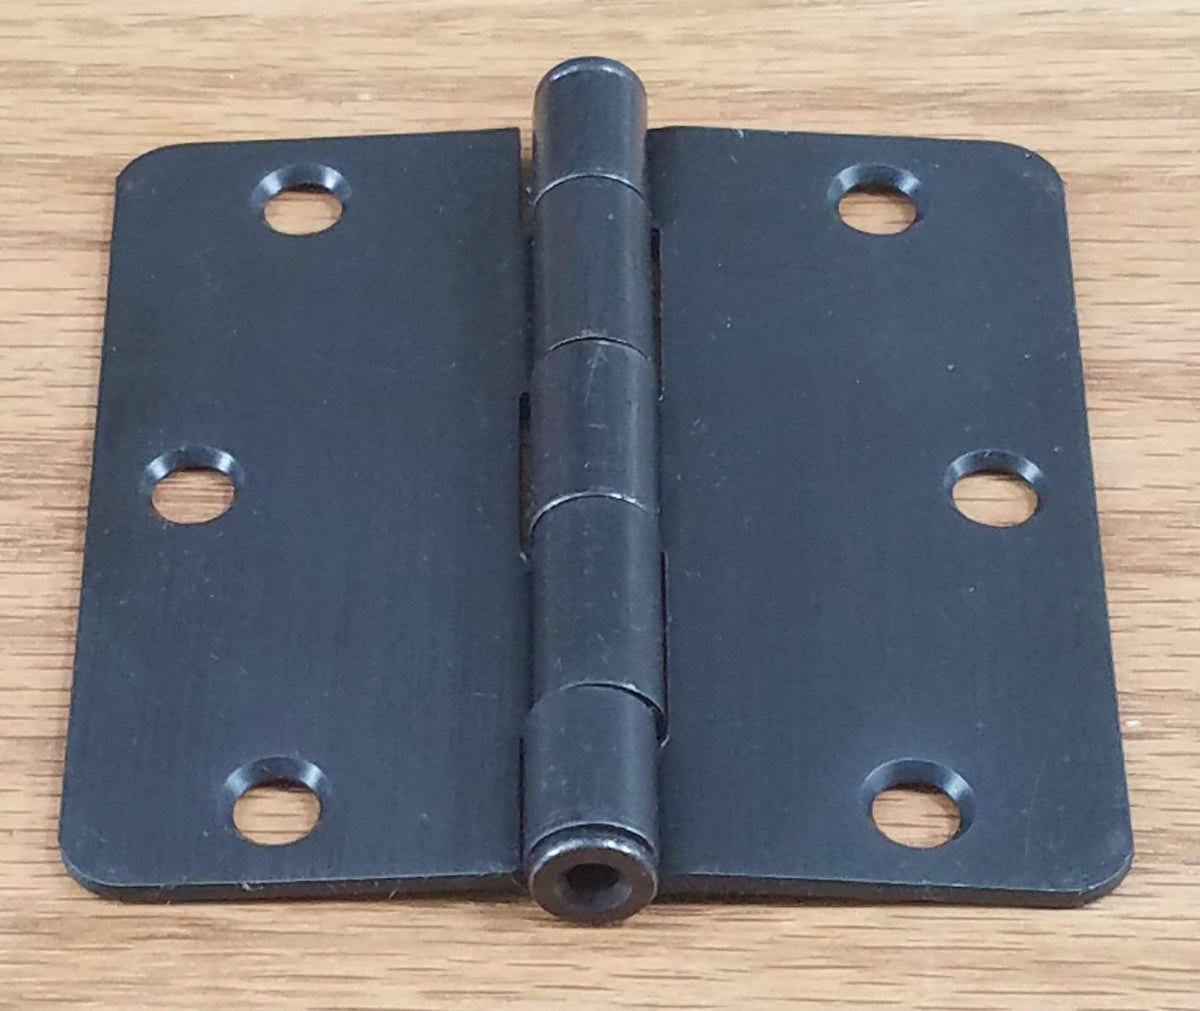 Oil Rubbed Bronze - Residential Door Hinges - Interior Butt - 3.5" Inches With 1/4" Radius - 2 Pack